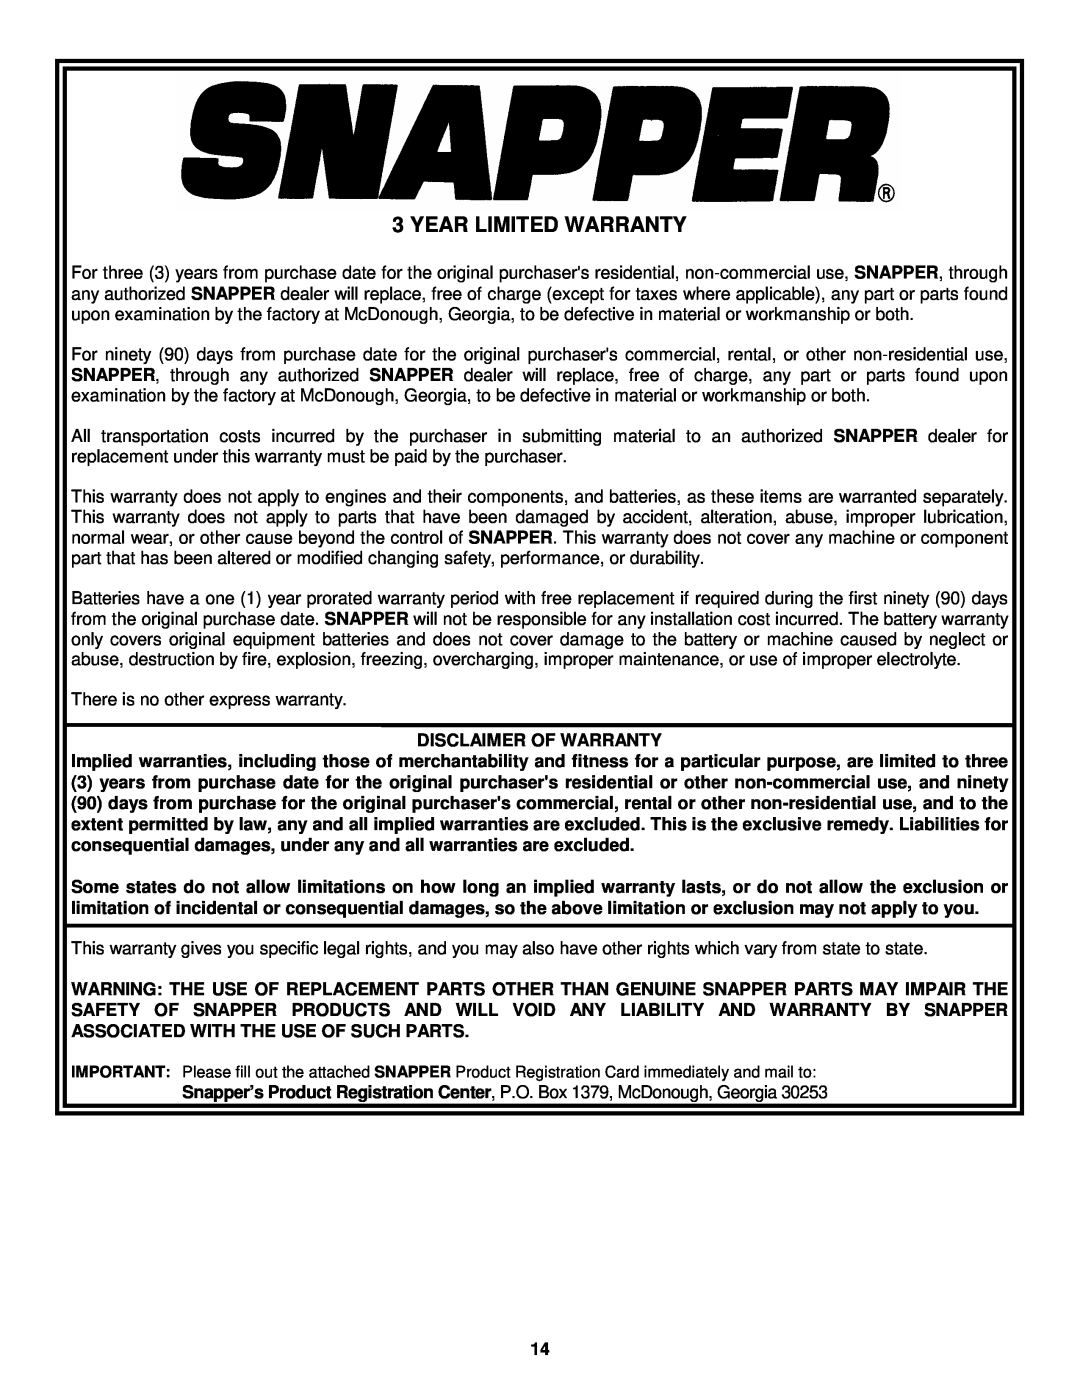 Snapper SX5200R, SX5200E important safety instructions Year Limited Warranty 